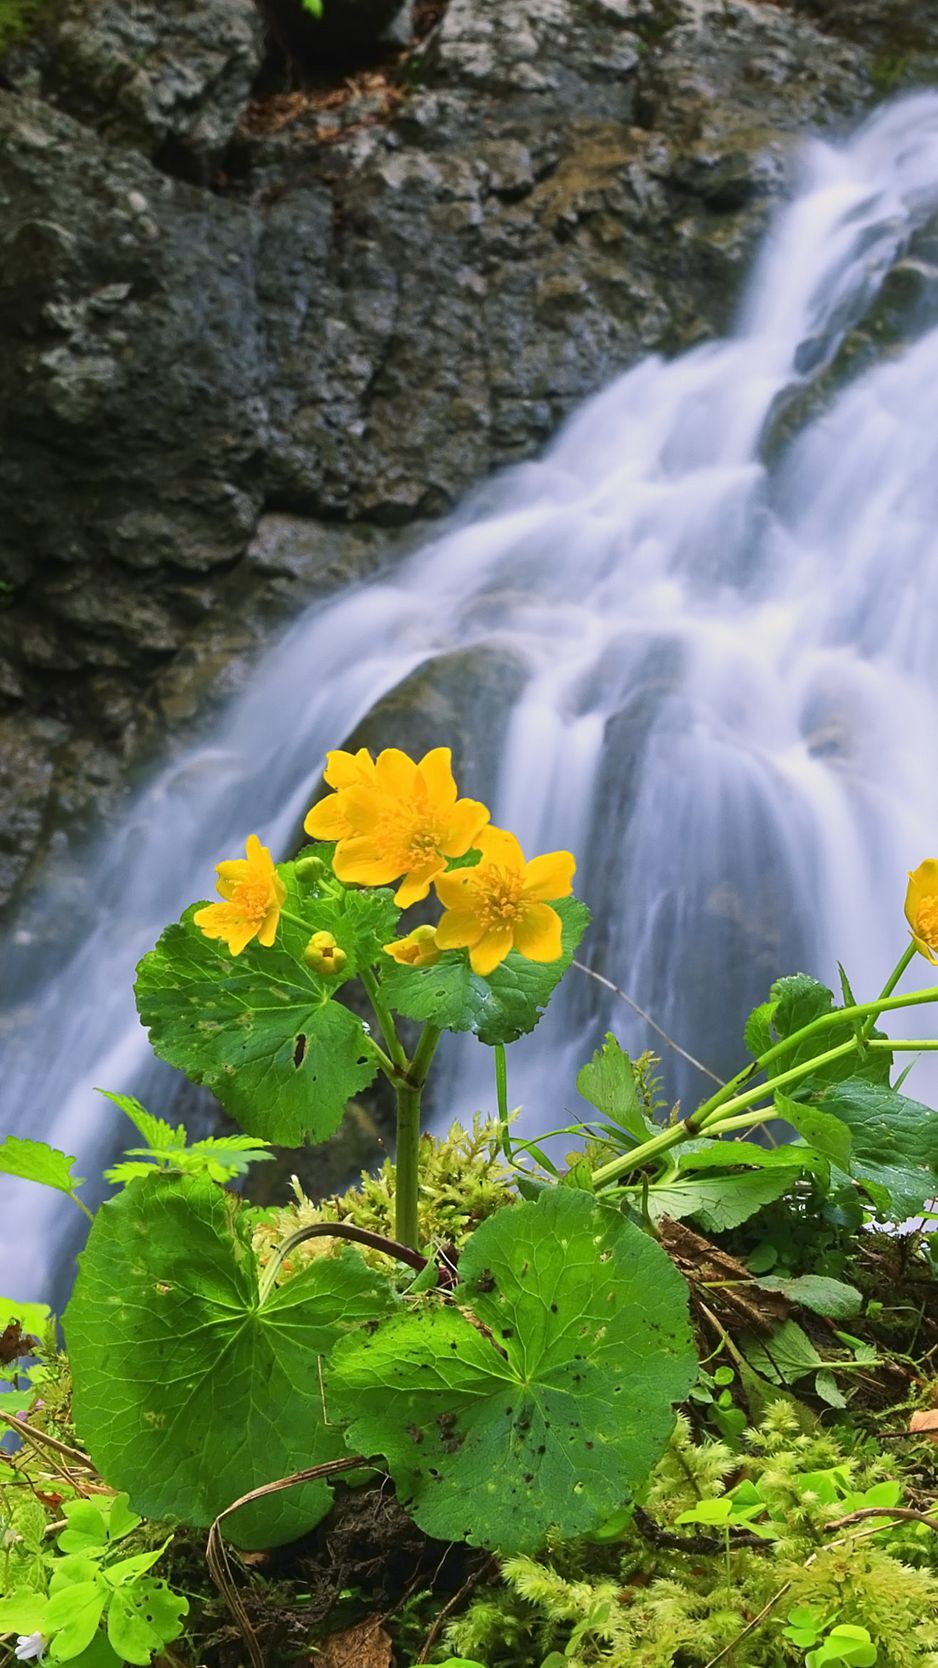 Waterfall And Flowers Wallpapers